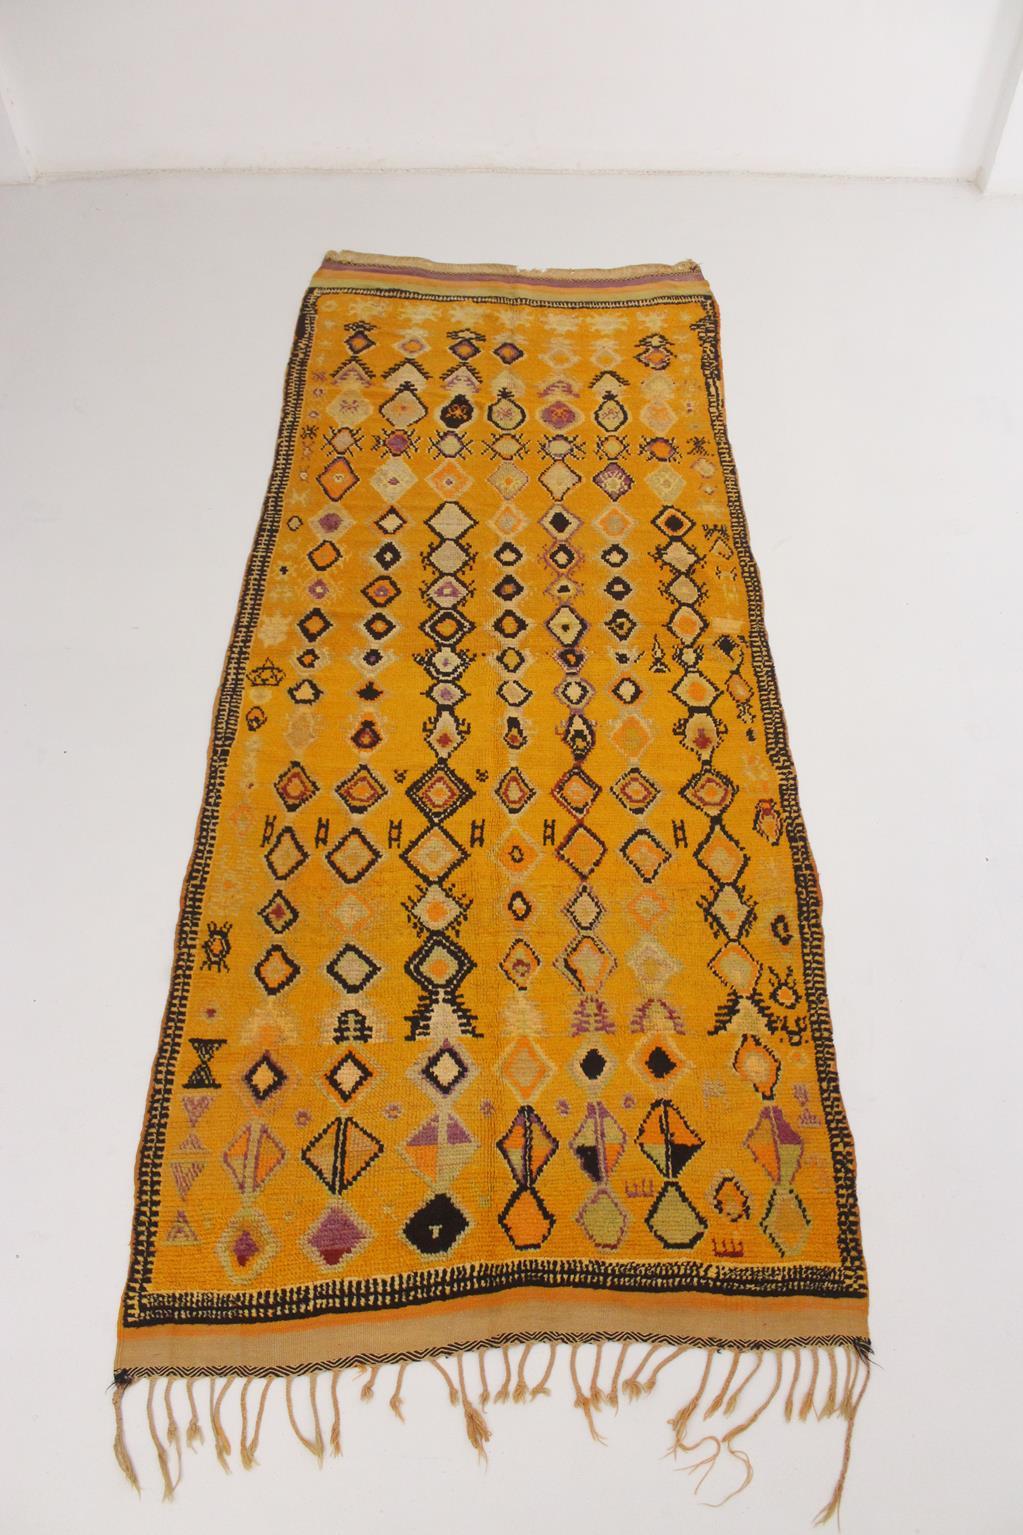 This rare vintage Ait Ouaouzguite rug was made in the area of Taznakht, Morocco.

It comes in a bright yellow -naturally dyed with pomegranate peels- with black, purple, magenta and orange designs. The unregular diamond series, which look like a